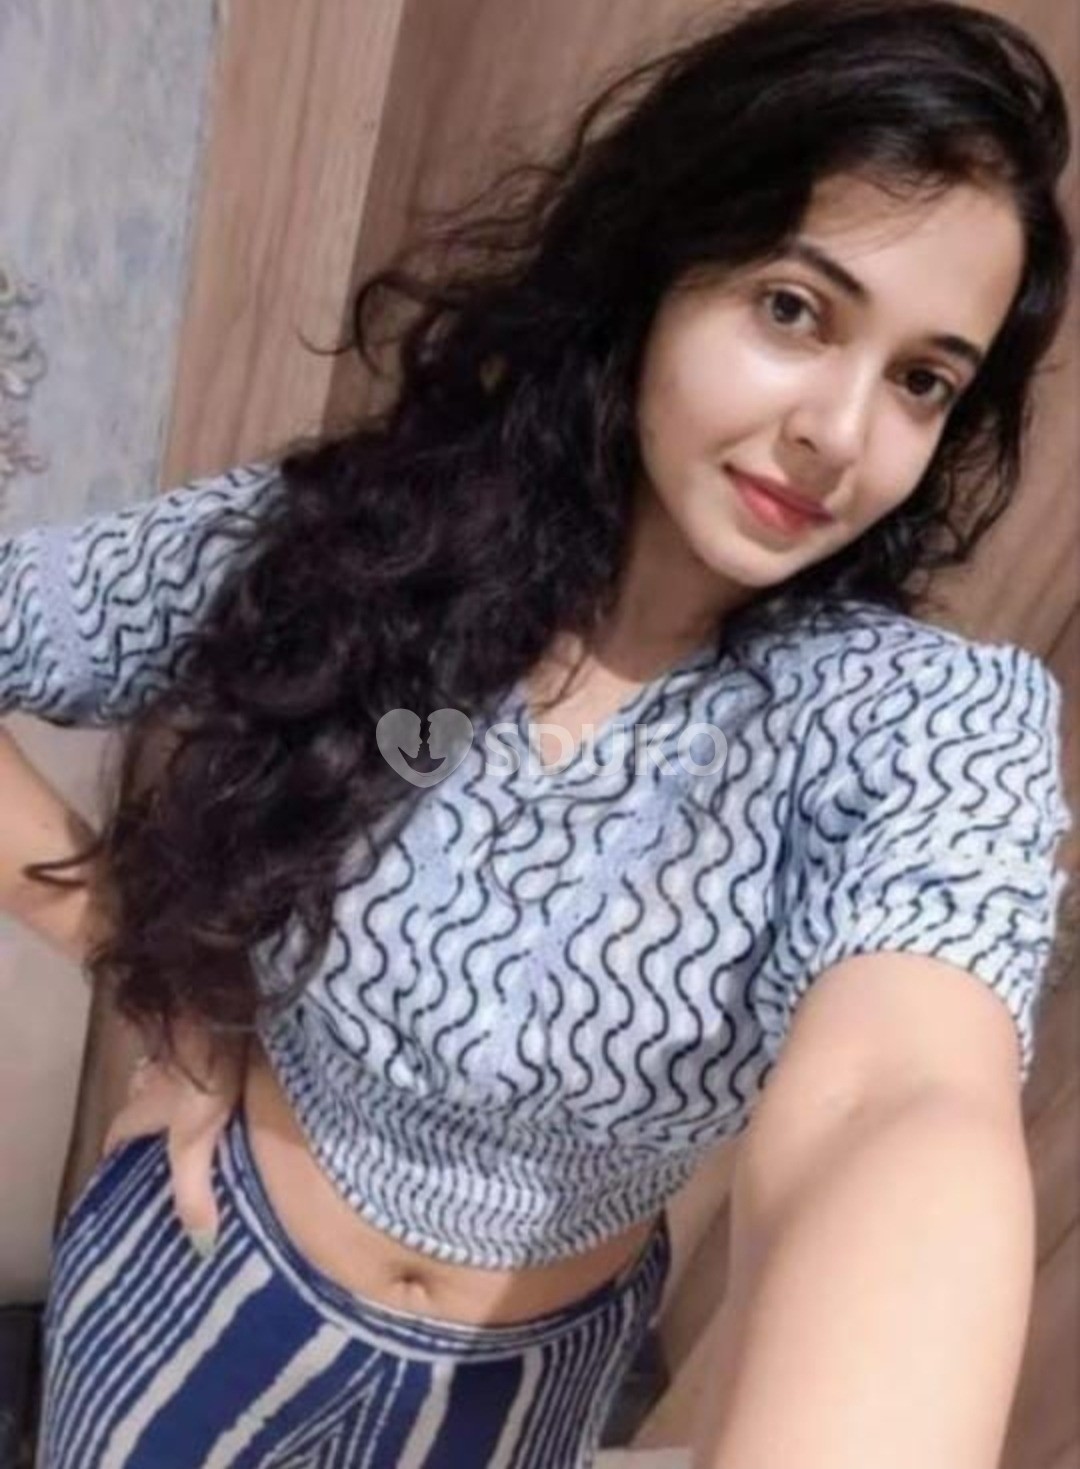 Alwarpet LOW PRICE🔸hj✅( 24×7 ) SERVICE A AVAILABLE 100% SAFE AND S SECURE UNLIMITED ENJOY HOT COLLEGE GIRL HOUSEWI